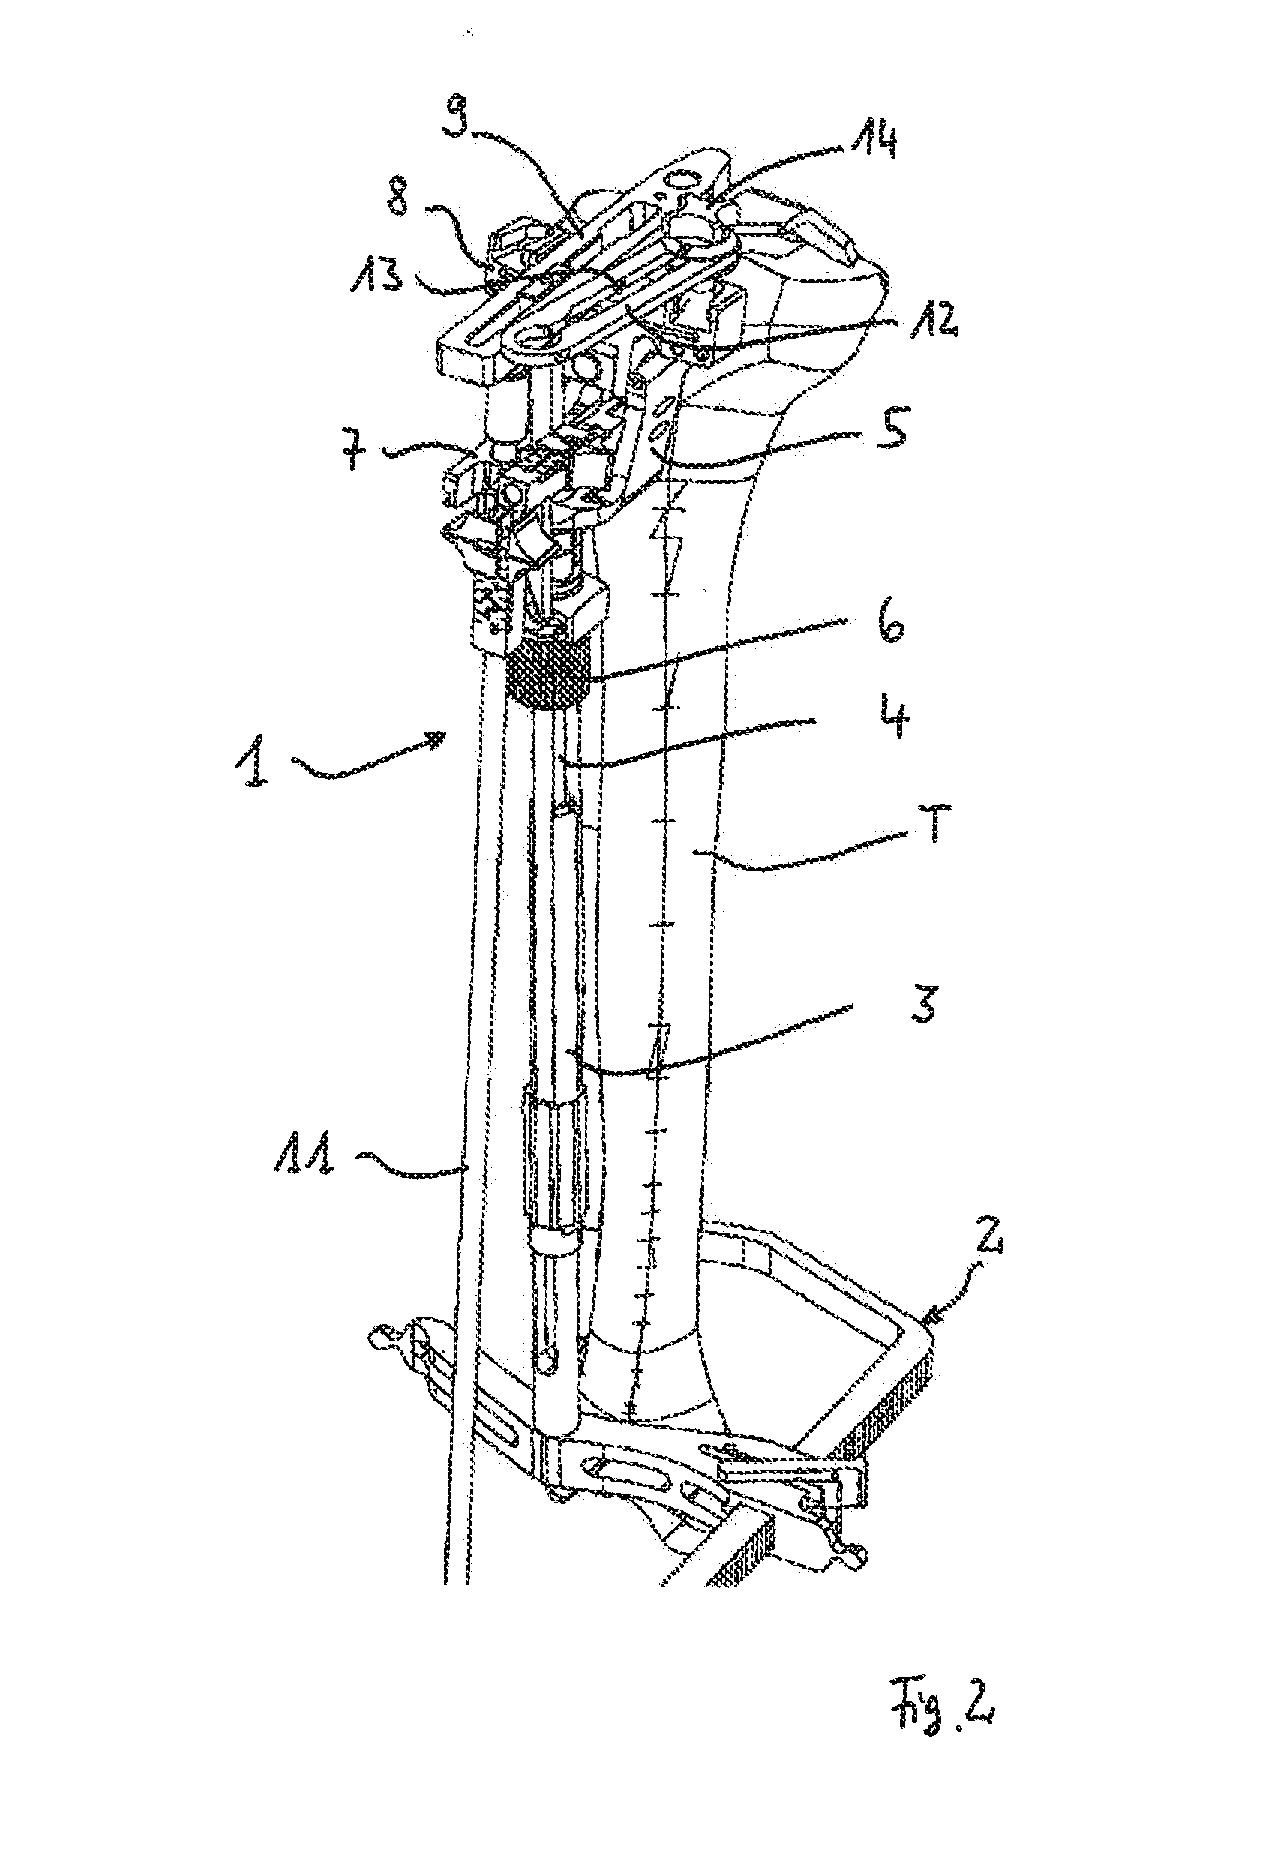 Device for defining a cutting plane for a bone resection